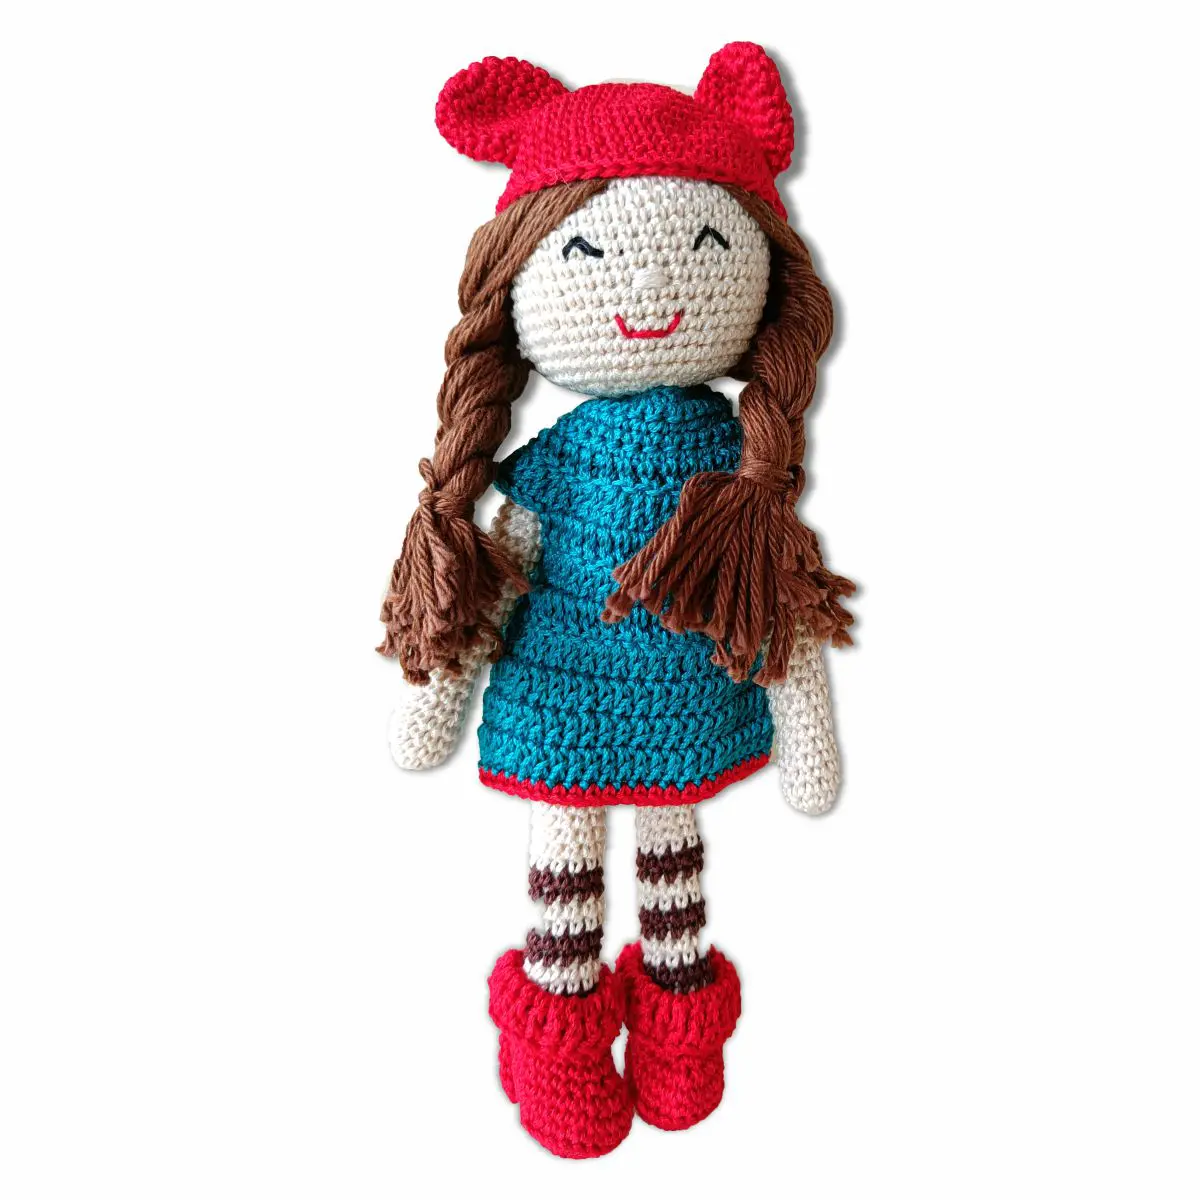 Clapjoy Soft Hand Knitted Cotton Thread Crochet Doll for kids (6 months – 13 years)